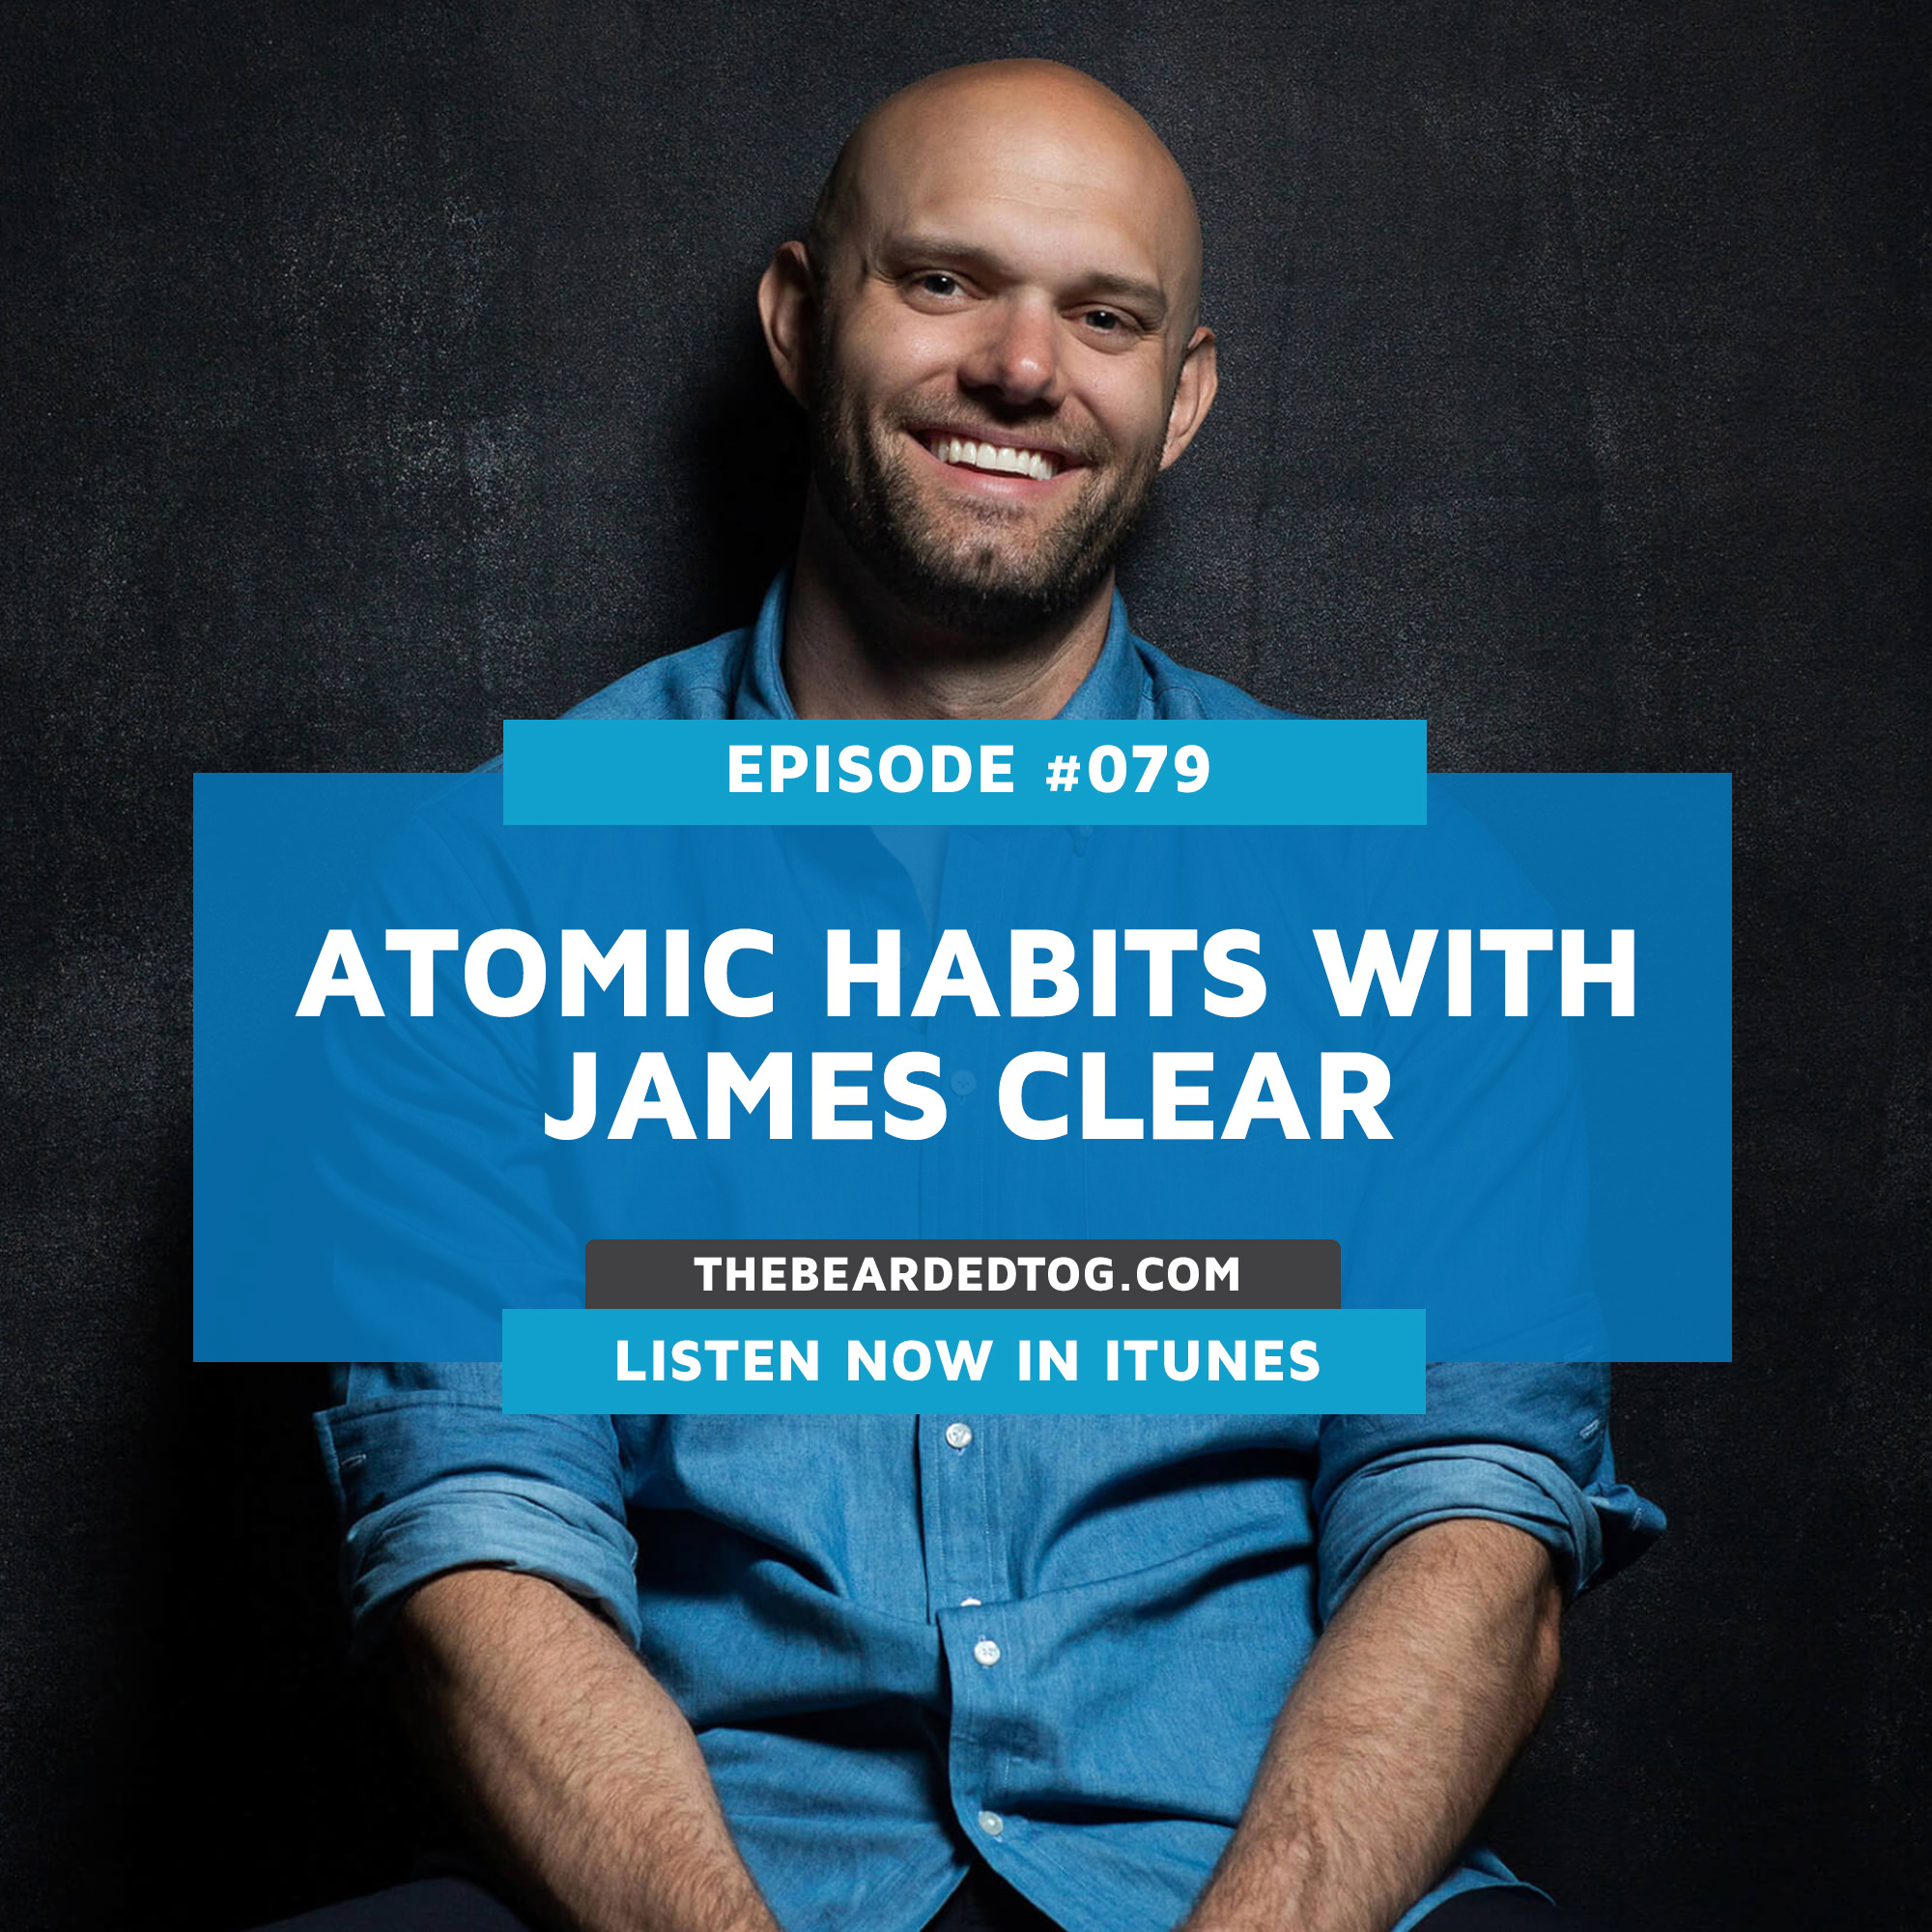 atomic habits james clear audiobook